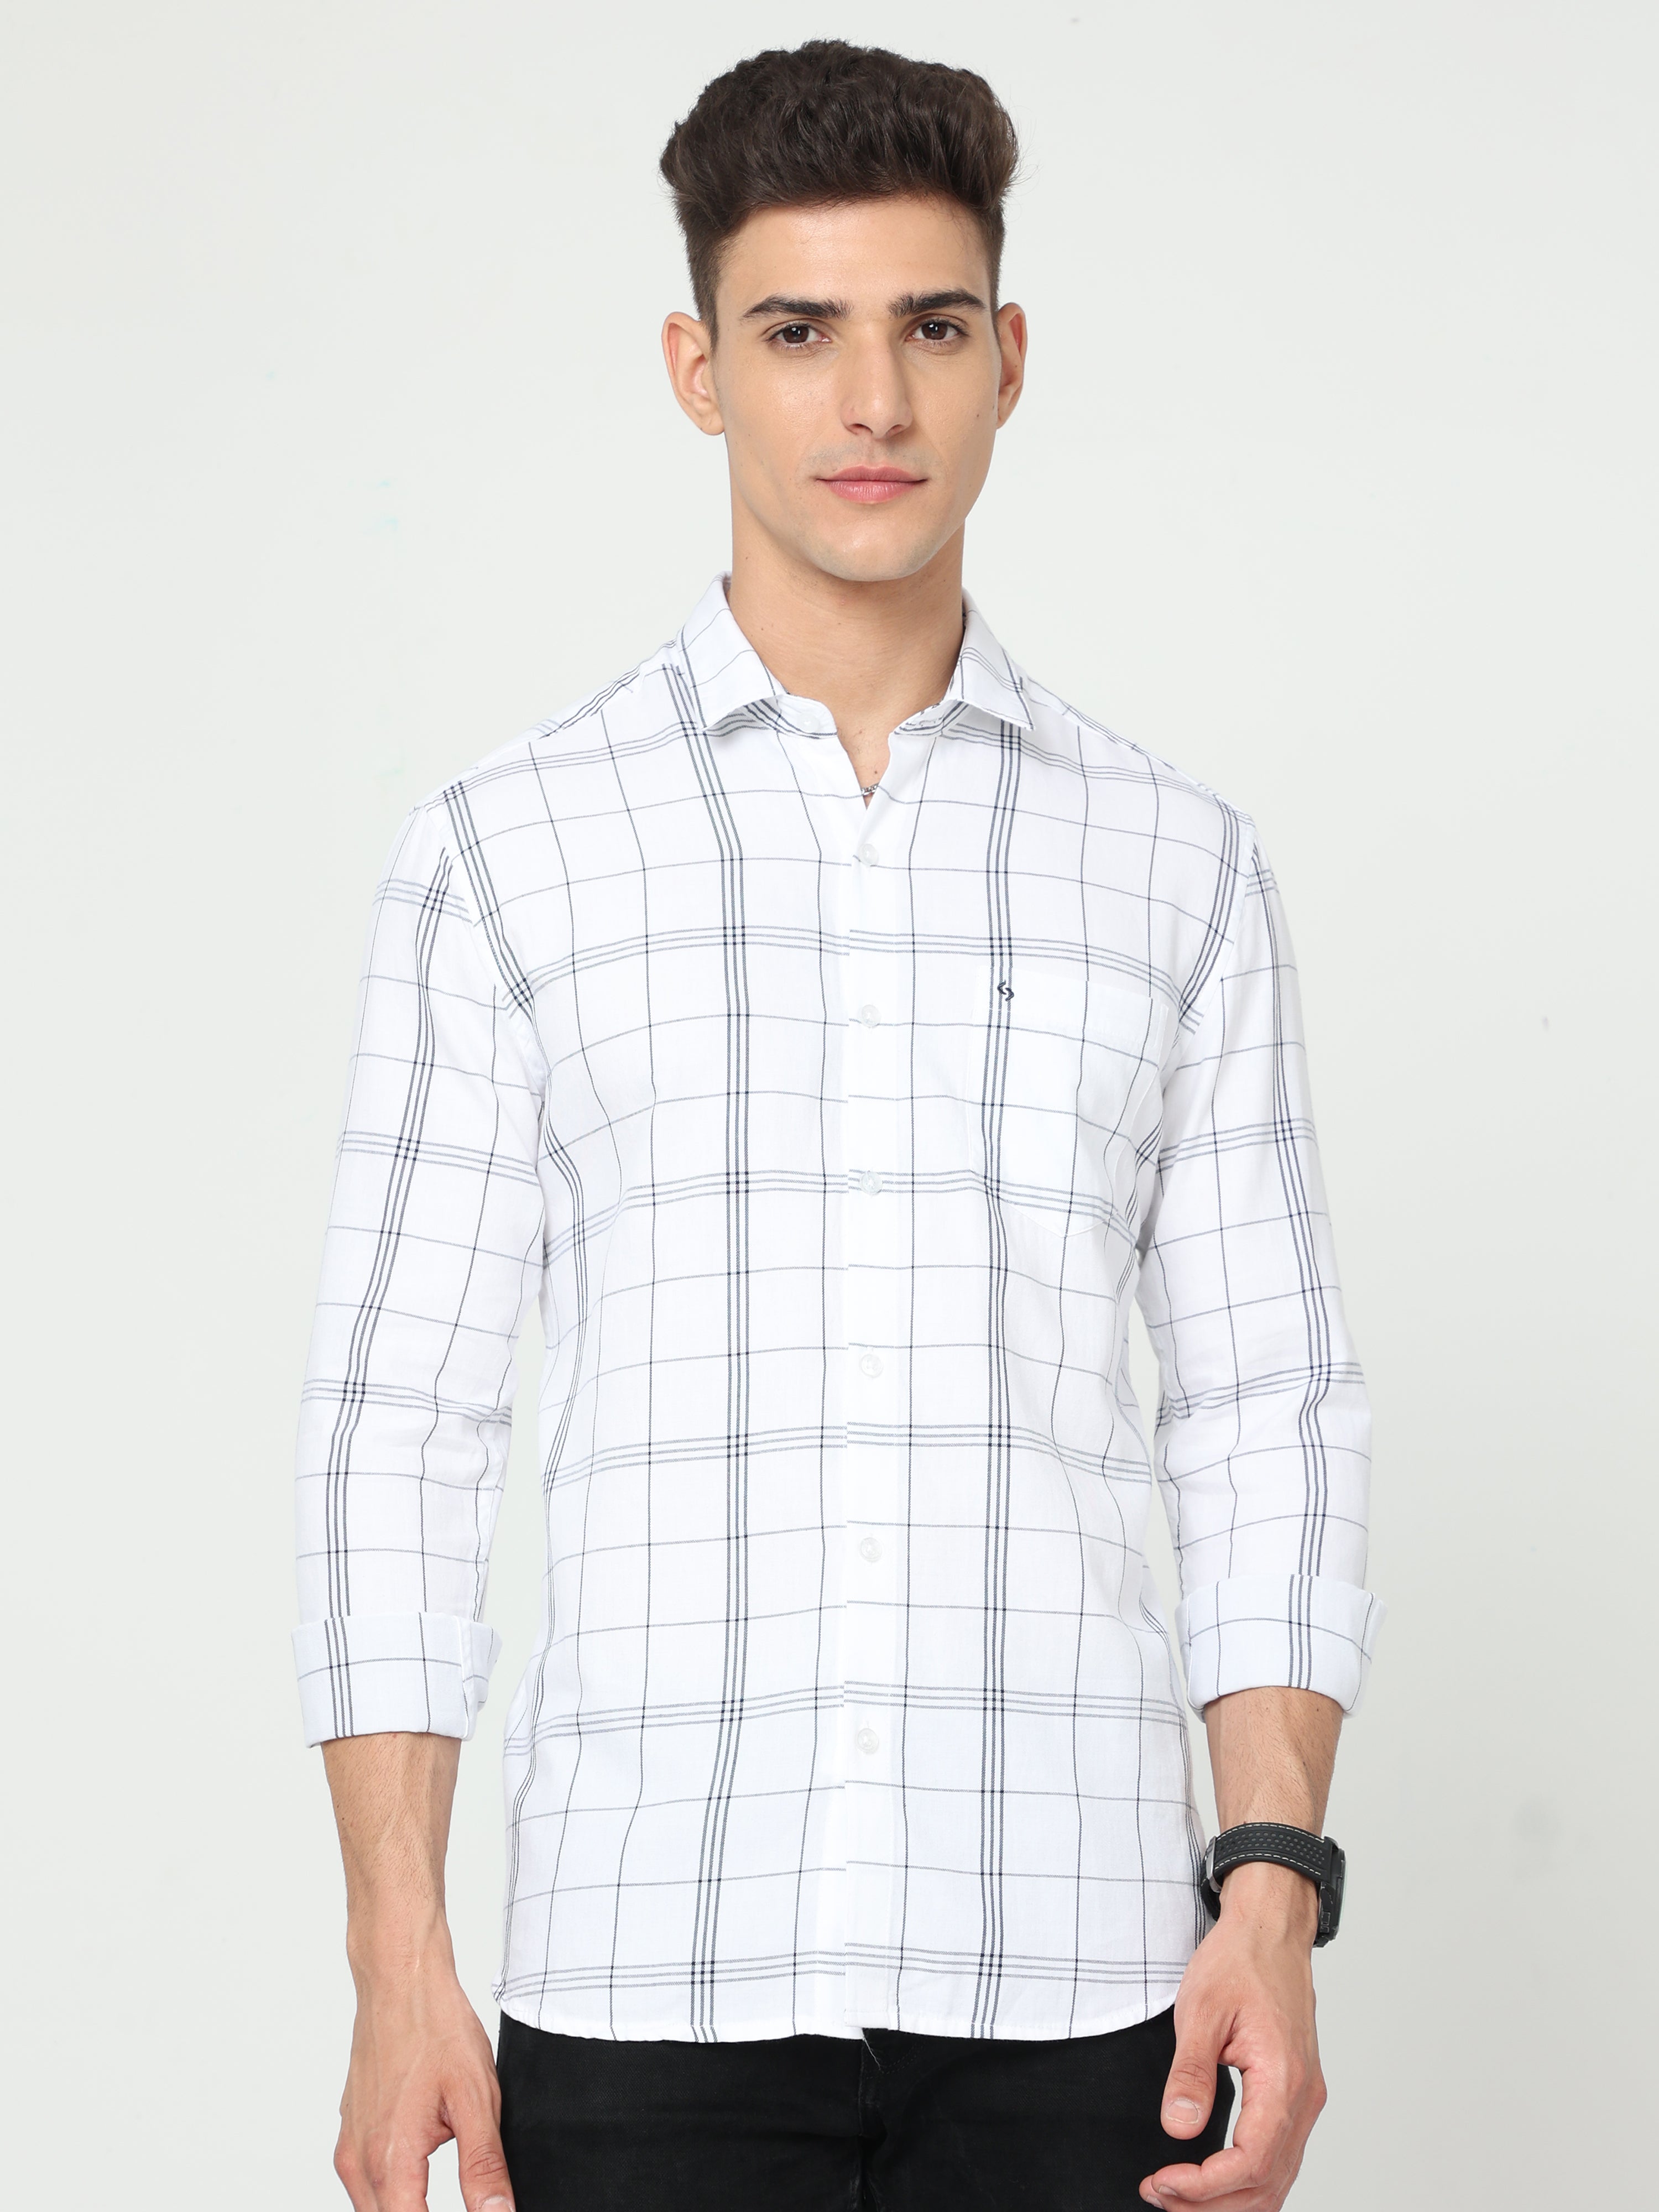 Classic Polo Men's Cotton Full Sleeve Checked Slim Fit Polo Neck White Color Woven Shirt | So1-92 A